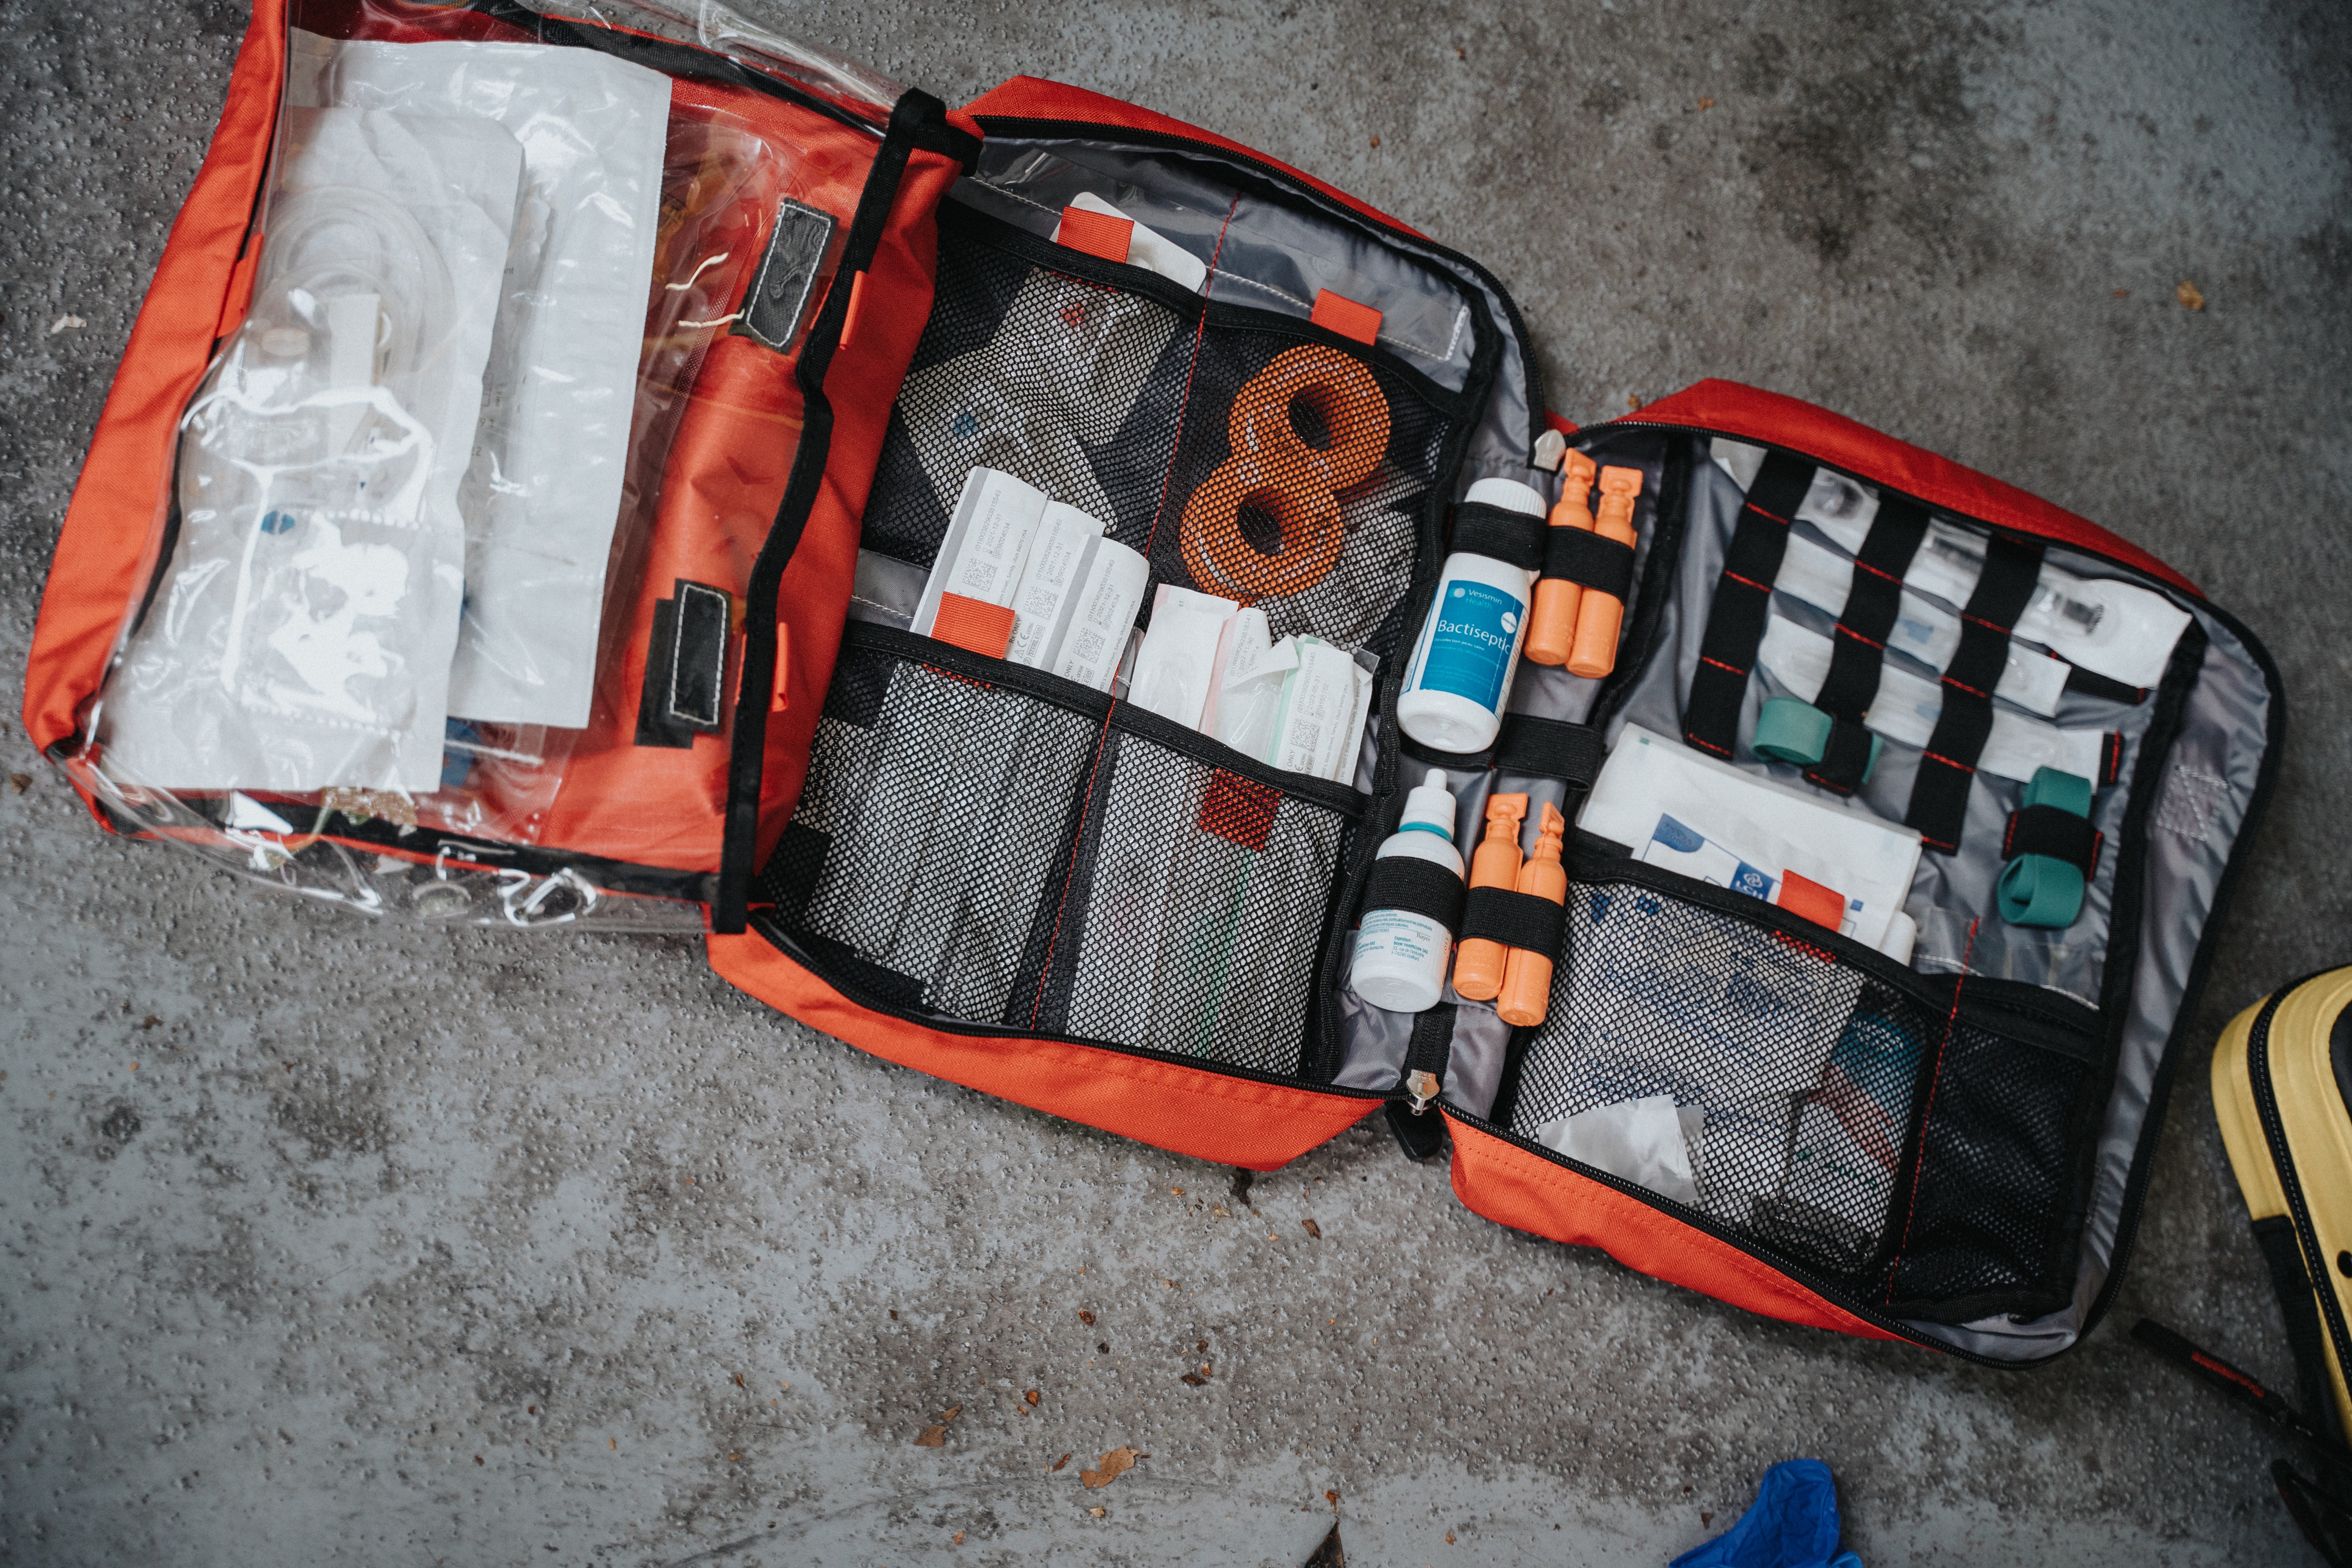 First aid kit as part of a home emergency preparedness supply kit.